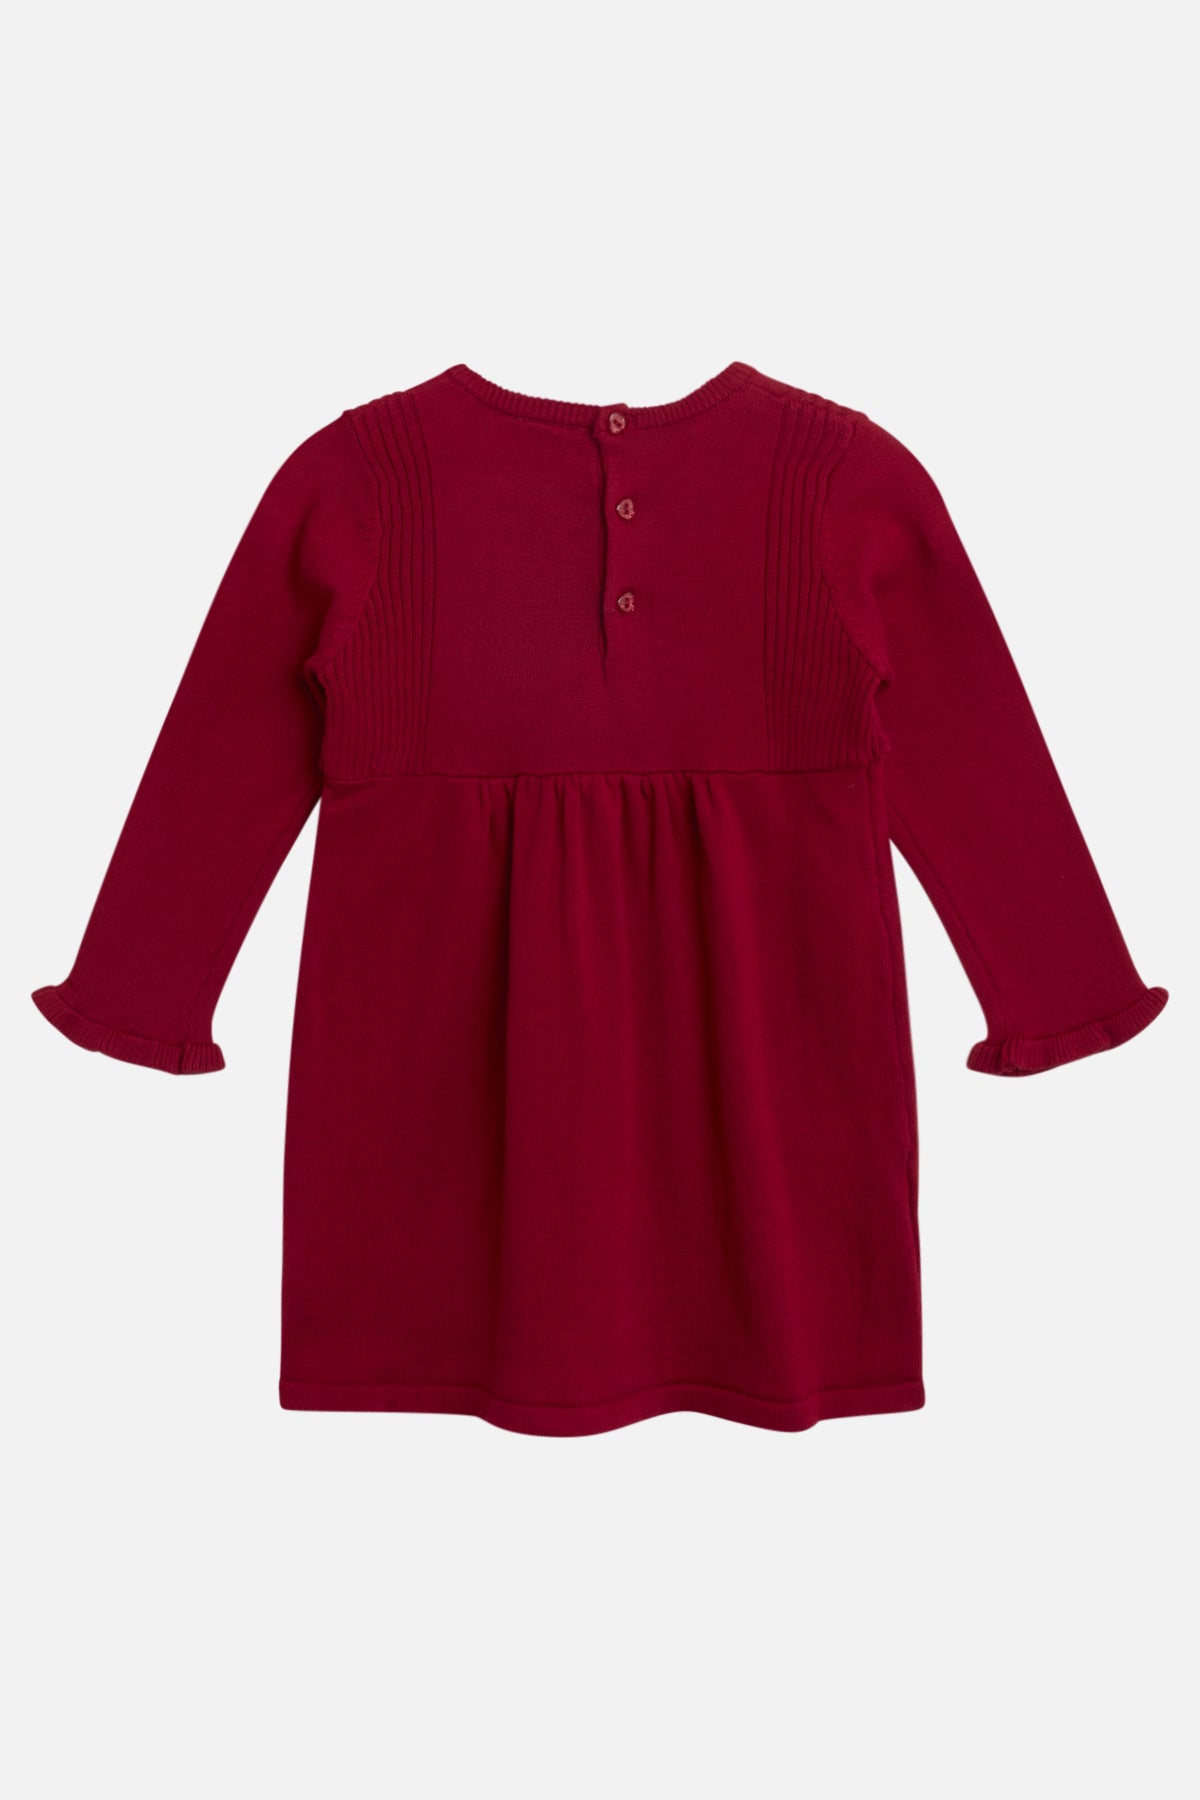 Kleid Rio Red Strick | Hust and Claire